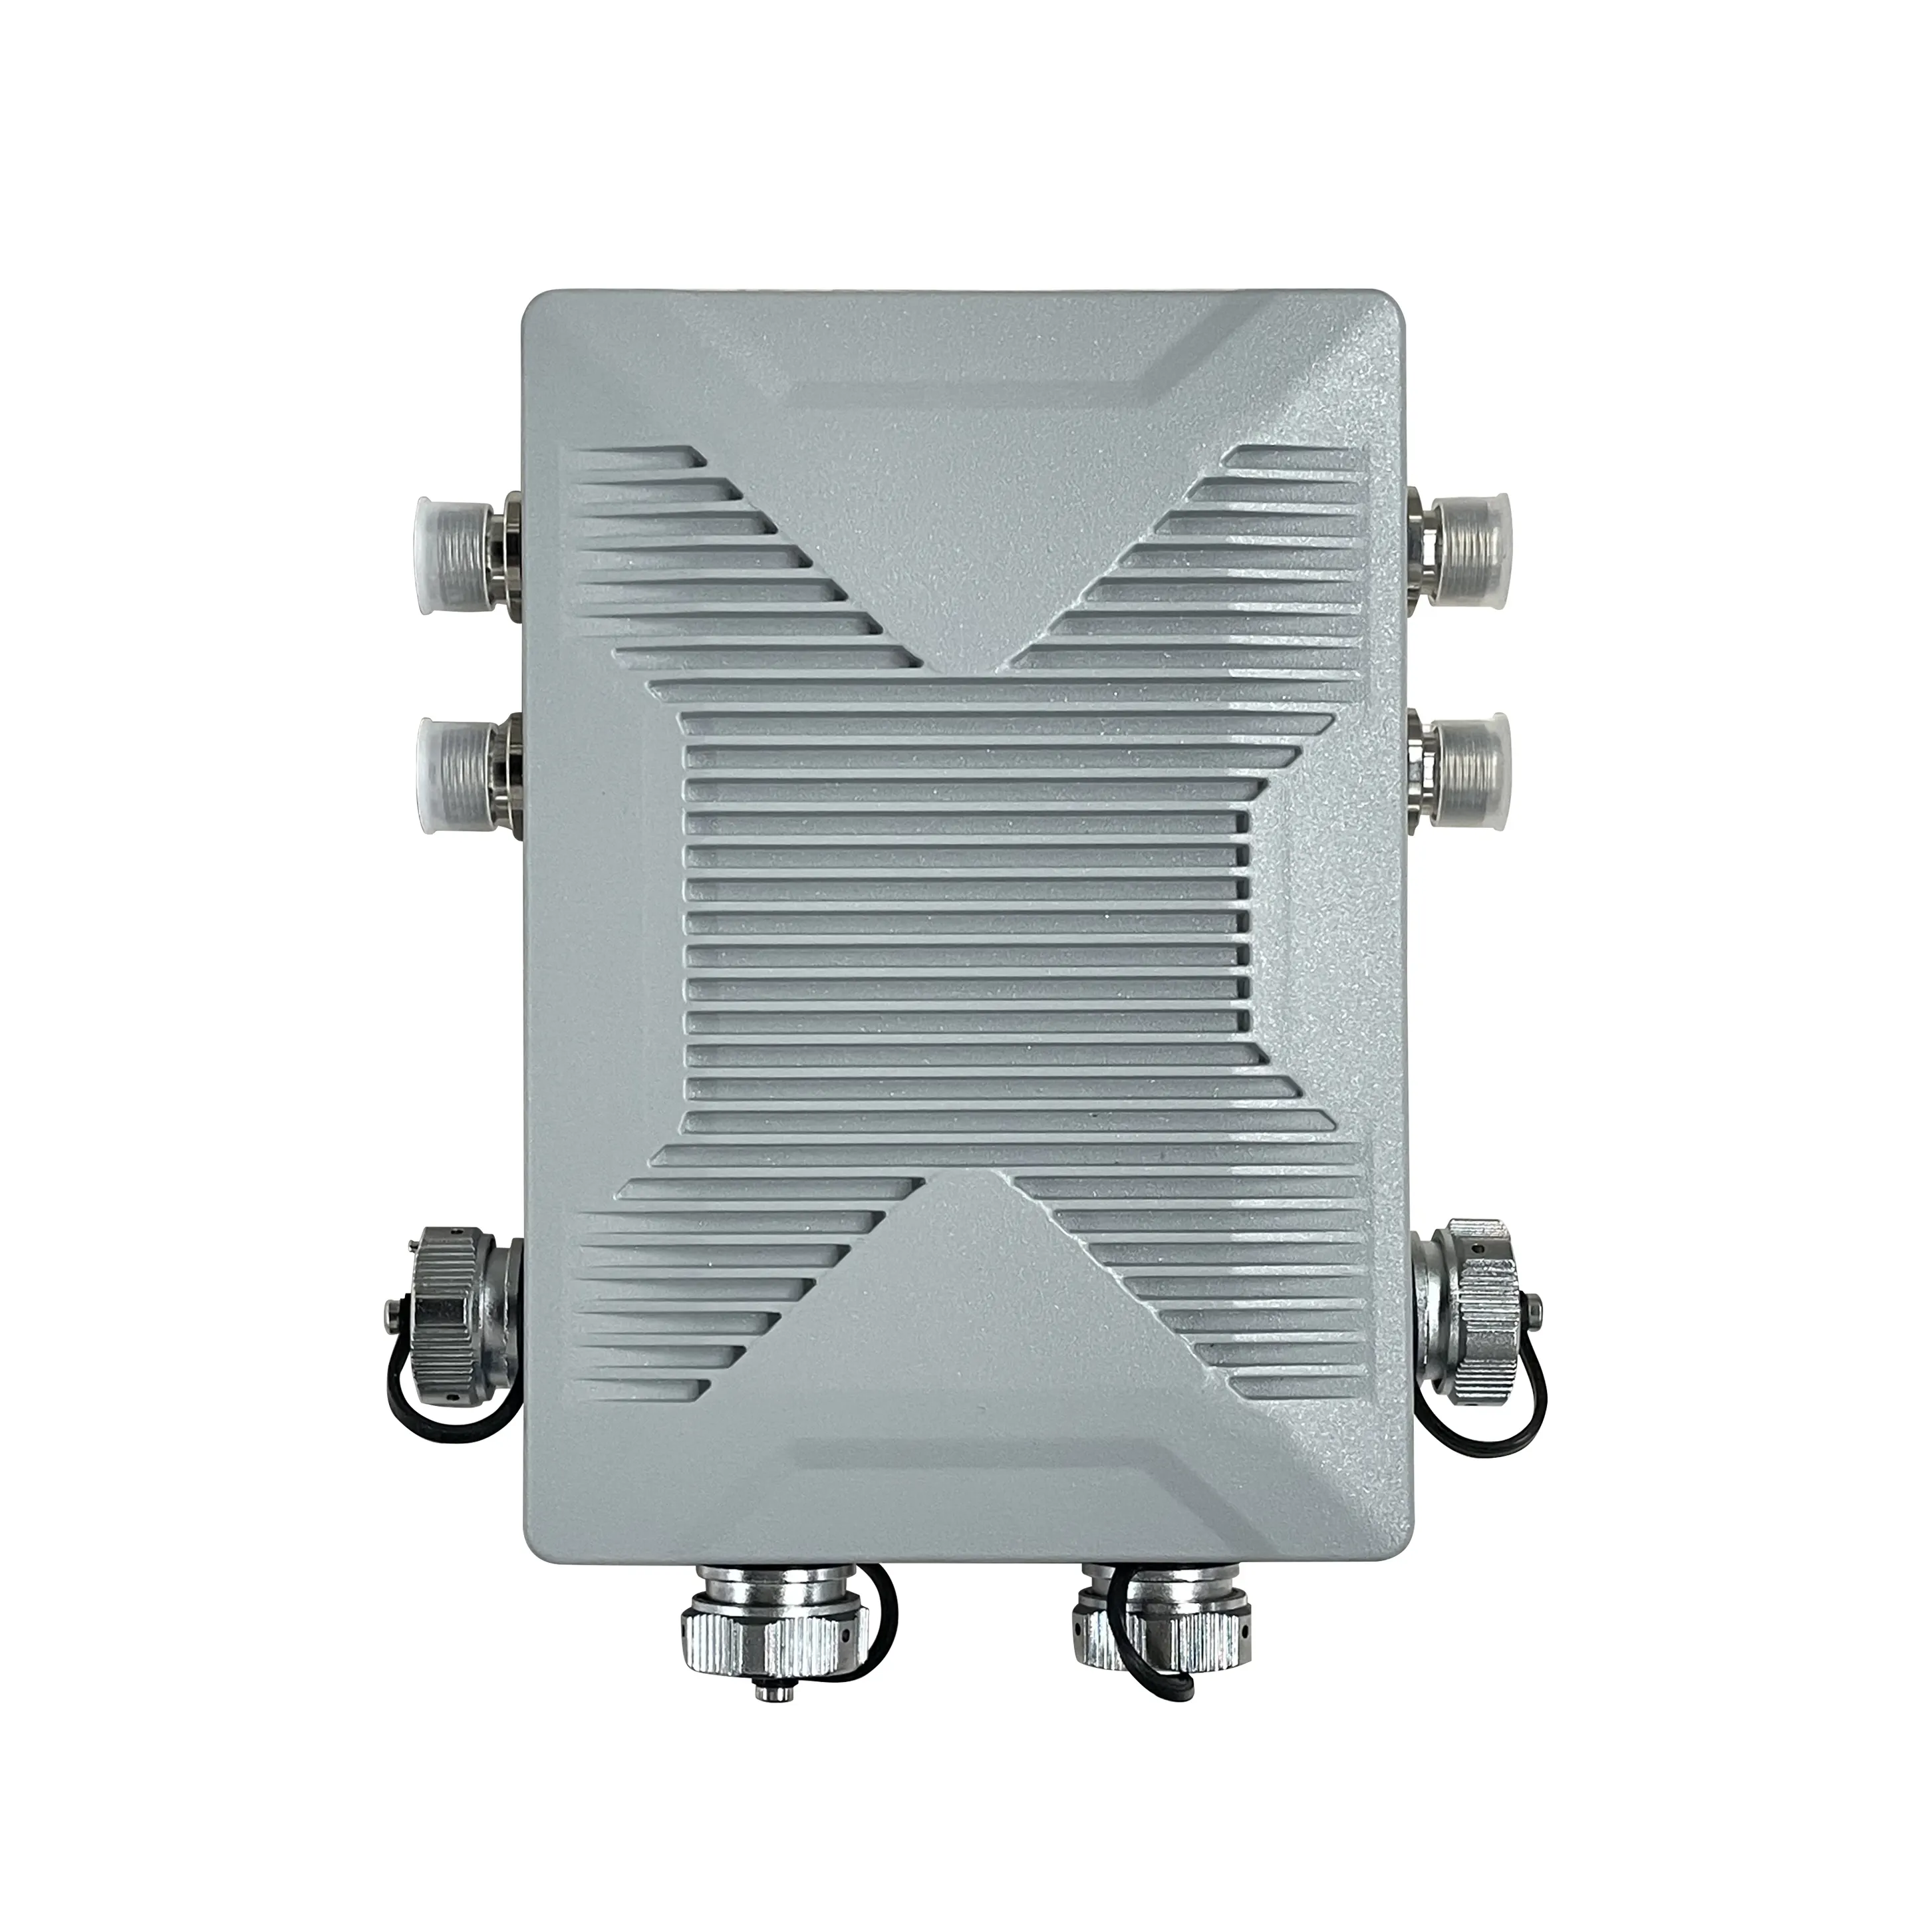 wide- narrow-band wireless product Draco CX5221-V001 1.4G/2.4G/5.8G star network (point-to-multipoint)